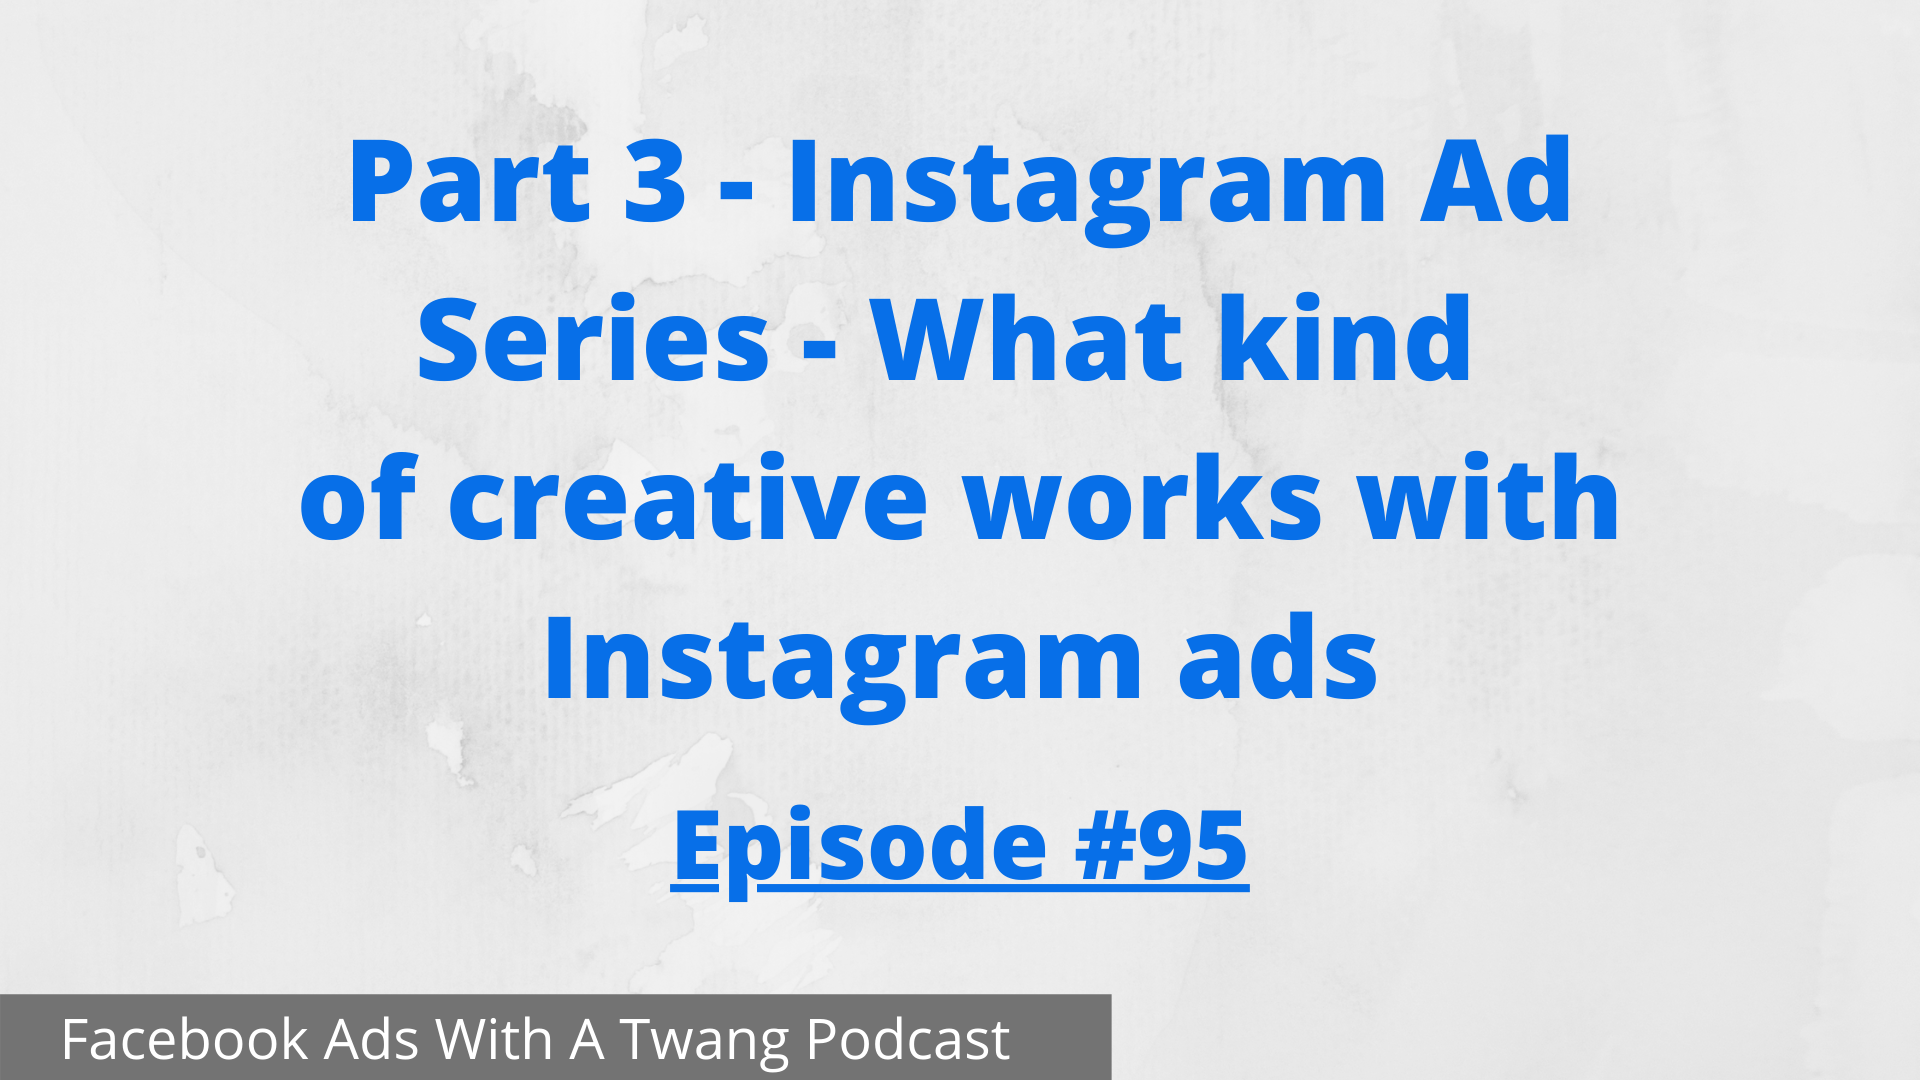 Part 3 - Instagram Ad Series - What kind of creative works with Instagram ads